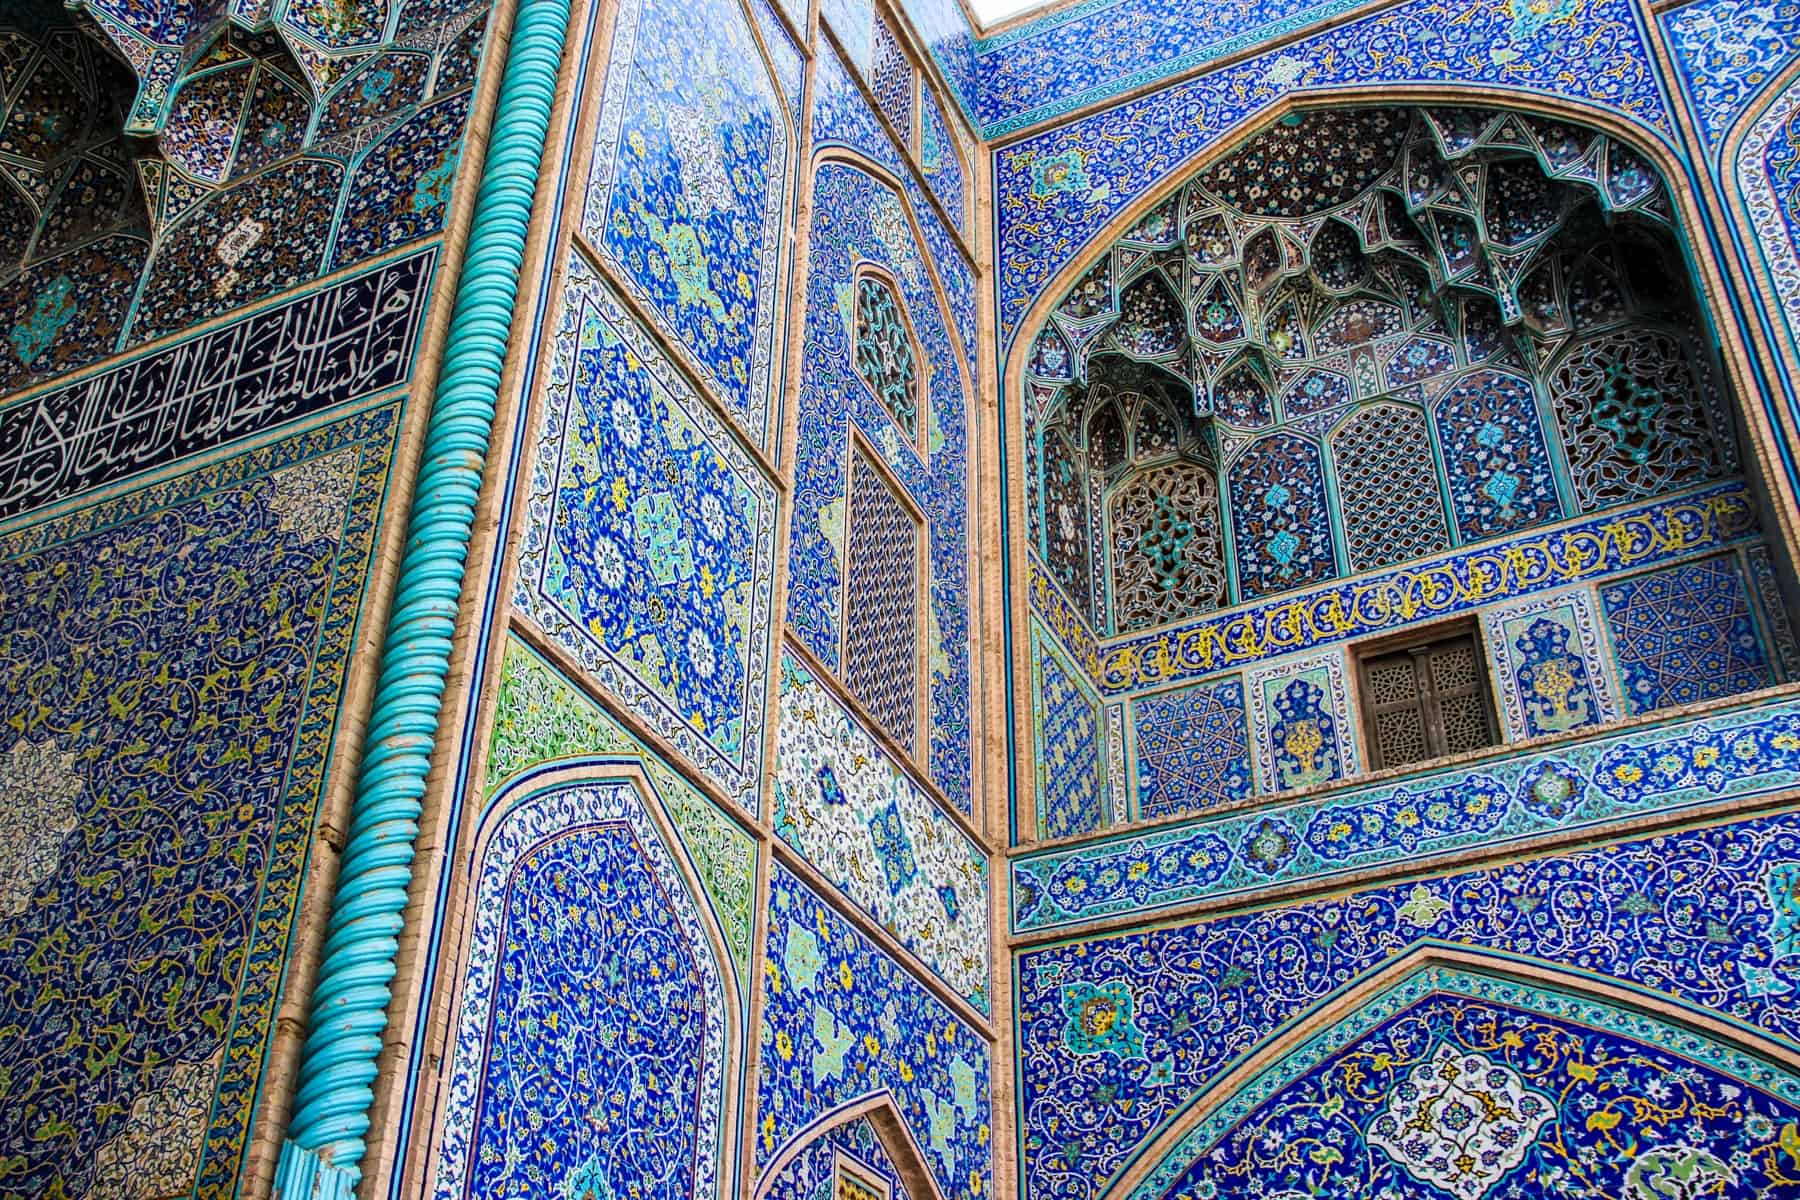 Close up of the gold and blue mosaic interior of the Sheikh Lotfollah Mosque in Isfahan.